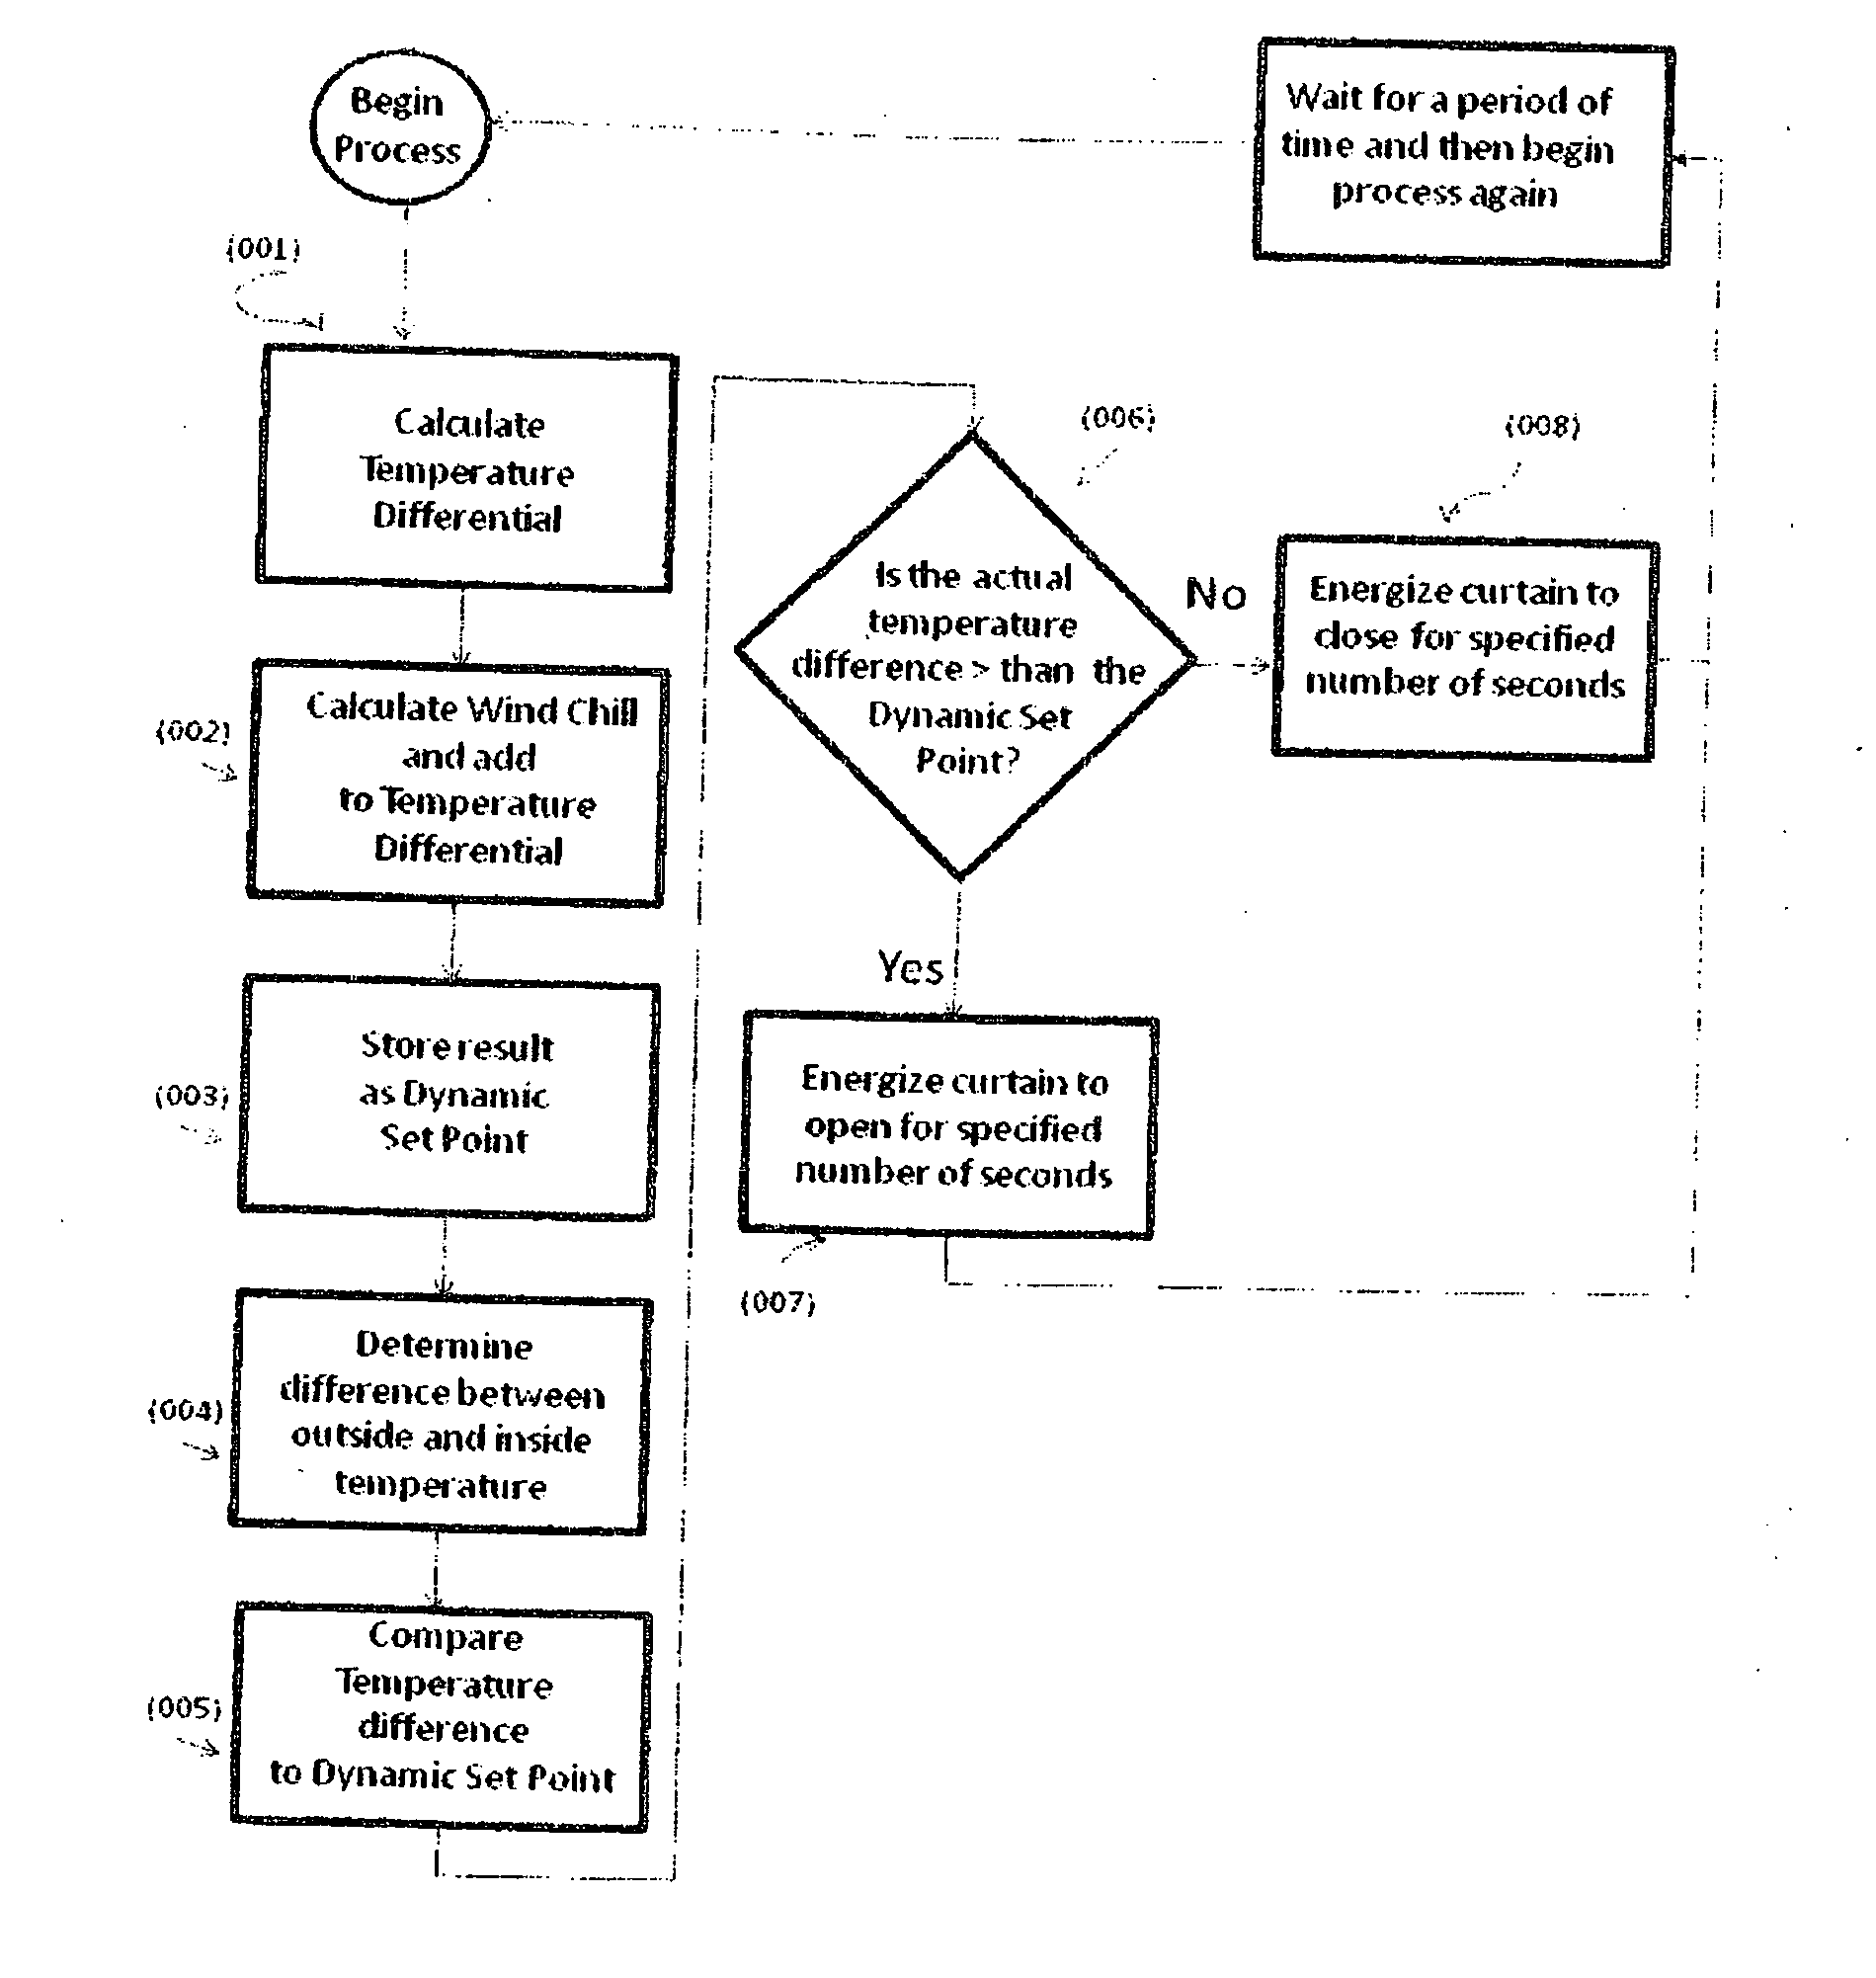 Method for controlling environmental conditions of livestock based upon the dynamics between temperature and wind chill